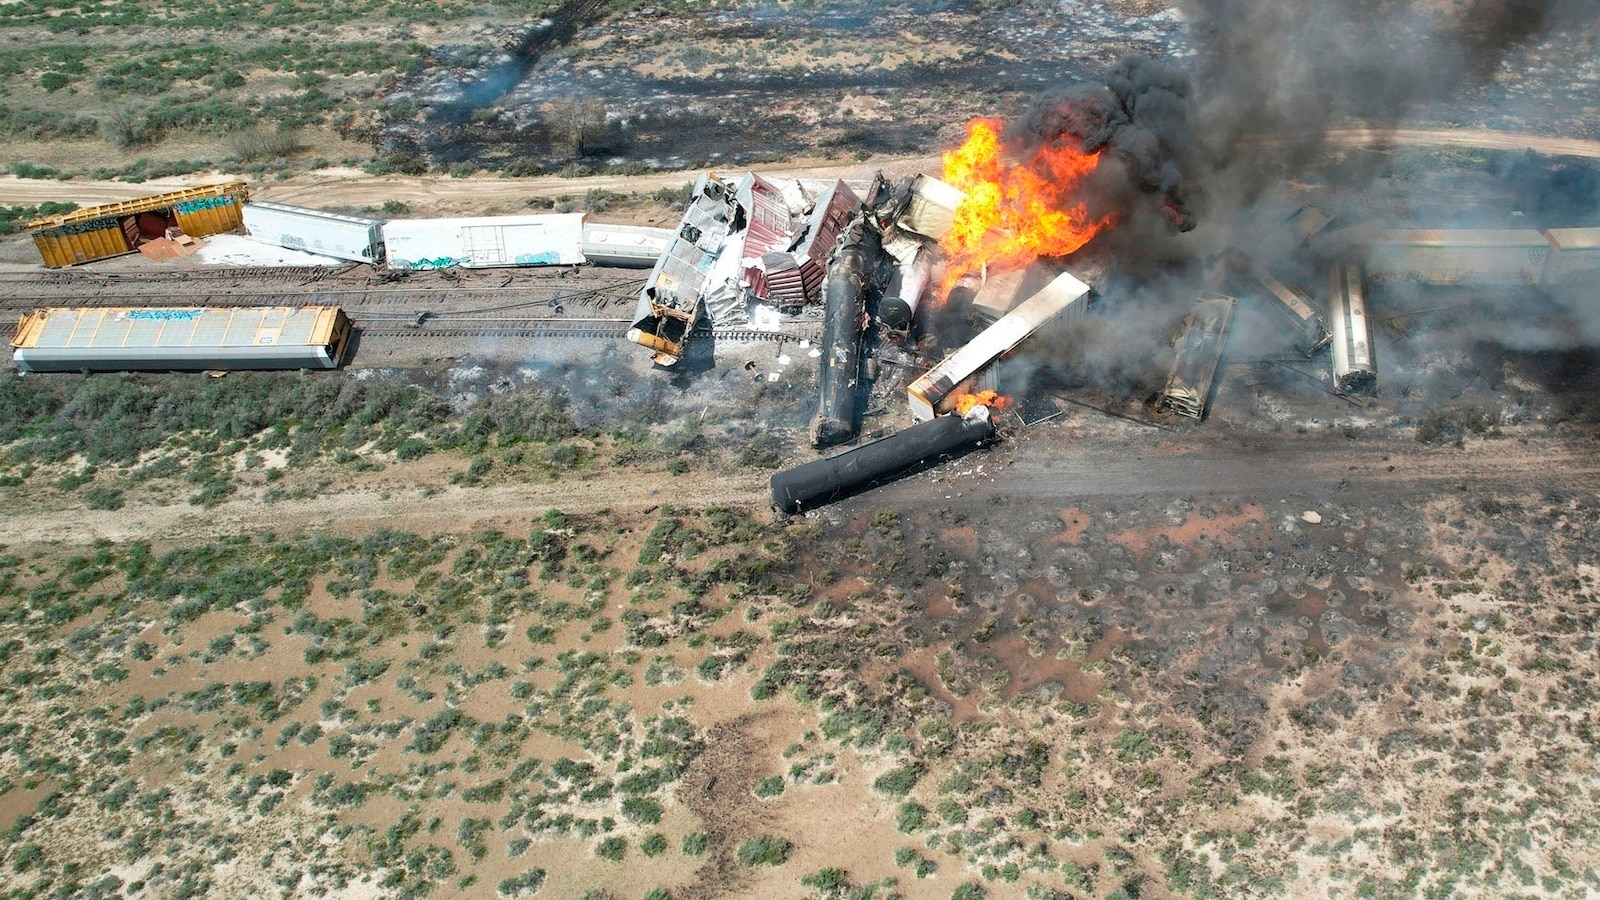 NTSB investigating after freight train carrying fuel derails, igniting large fire